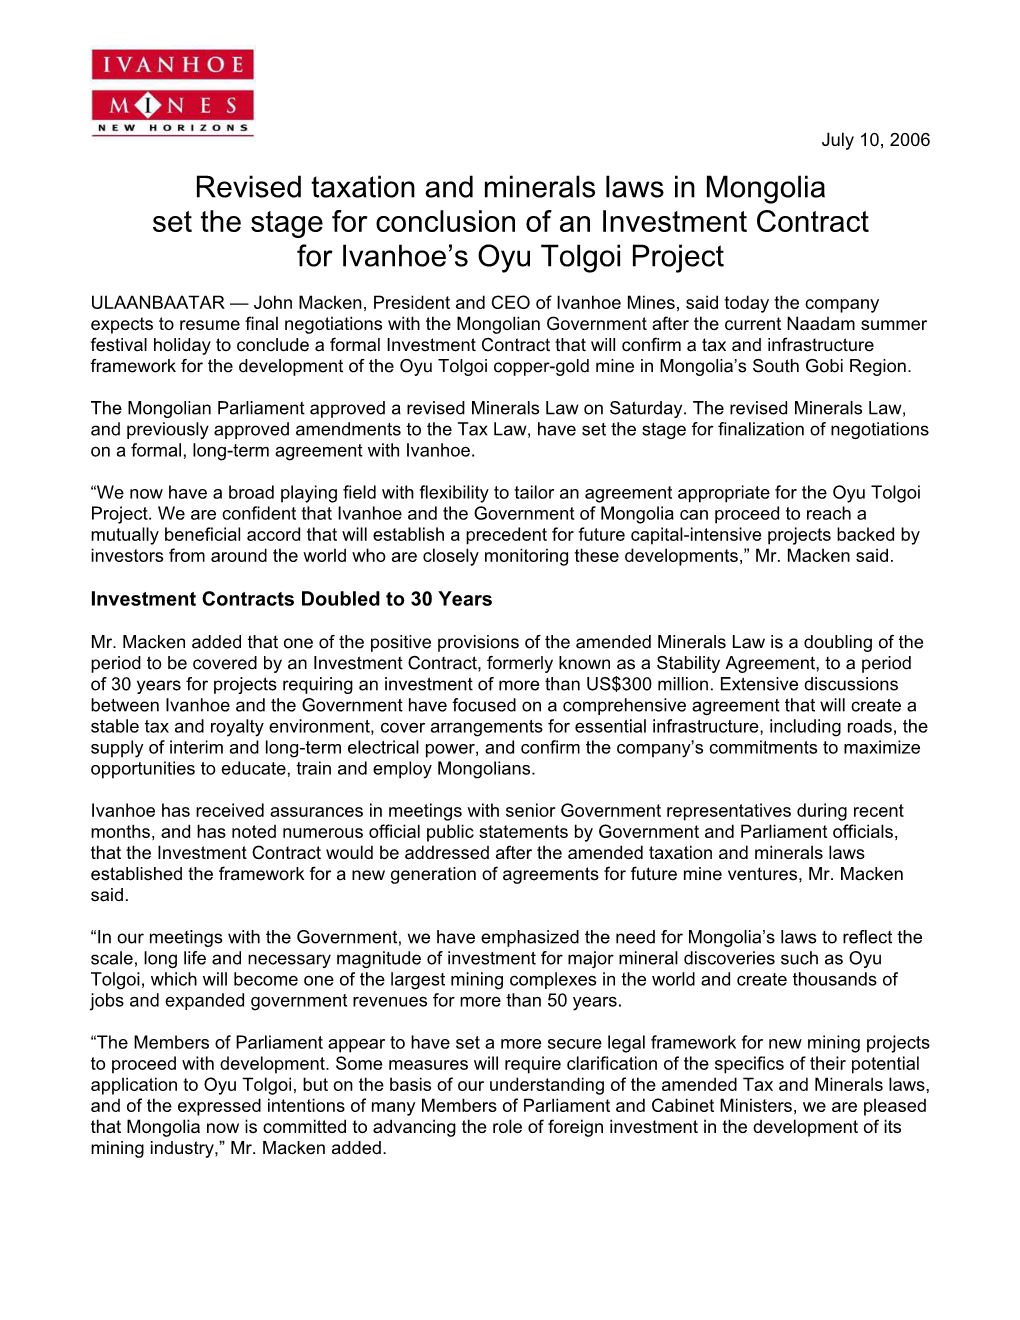 Revised Taxation and Minerals Laws in Mongolia Set the Stage for Conclusion of an Investment Contract for Ivanhoe’S Oyu Tolgoi Project